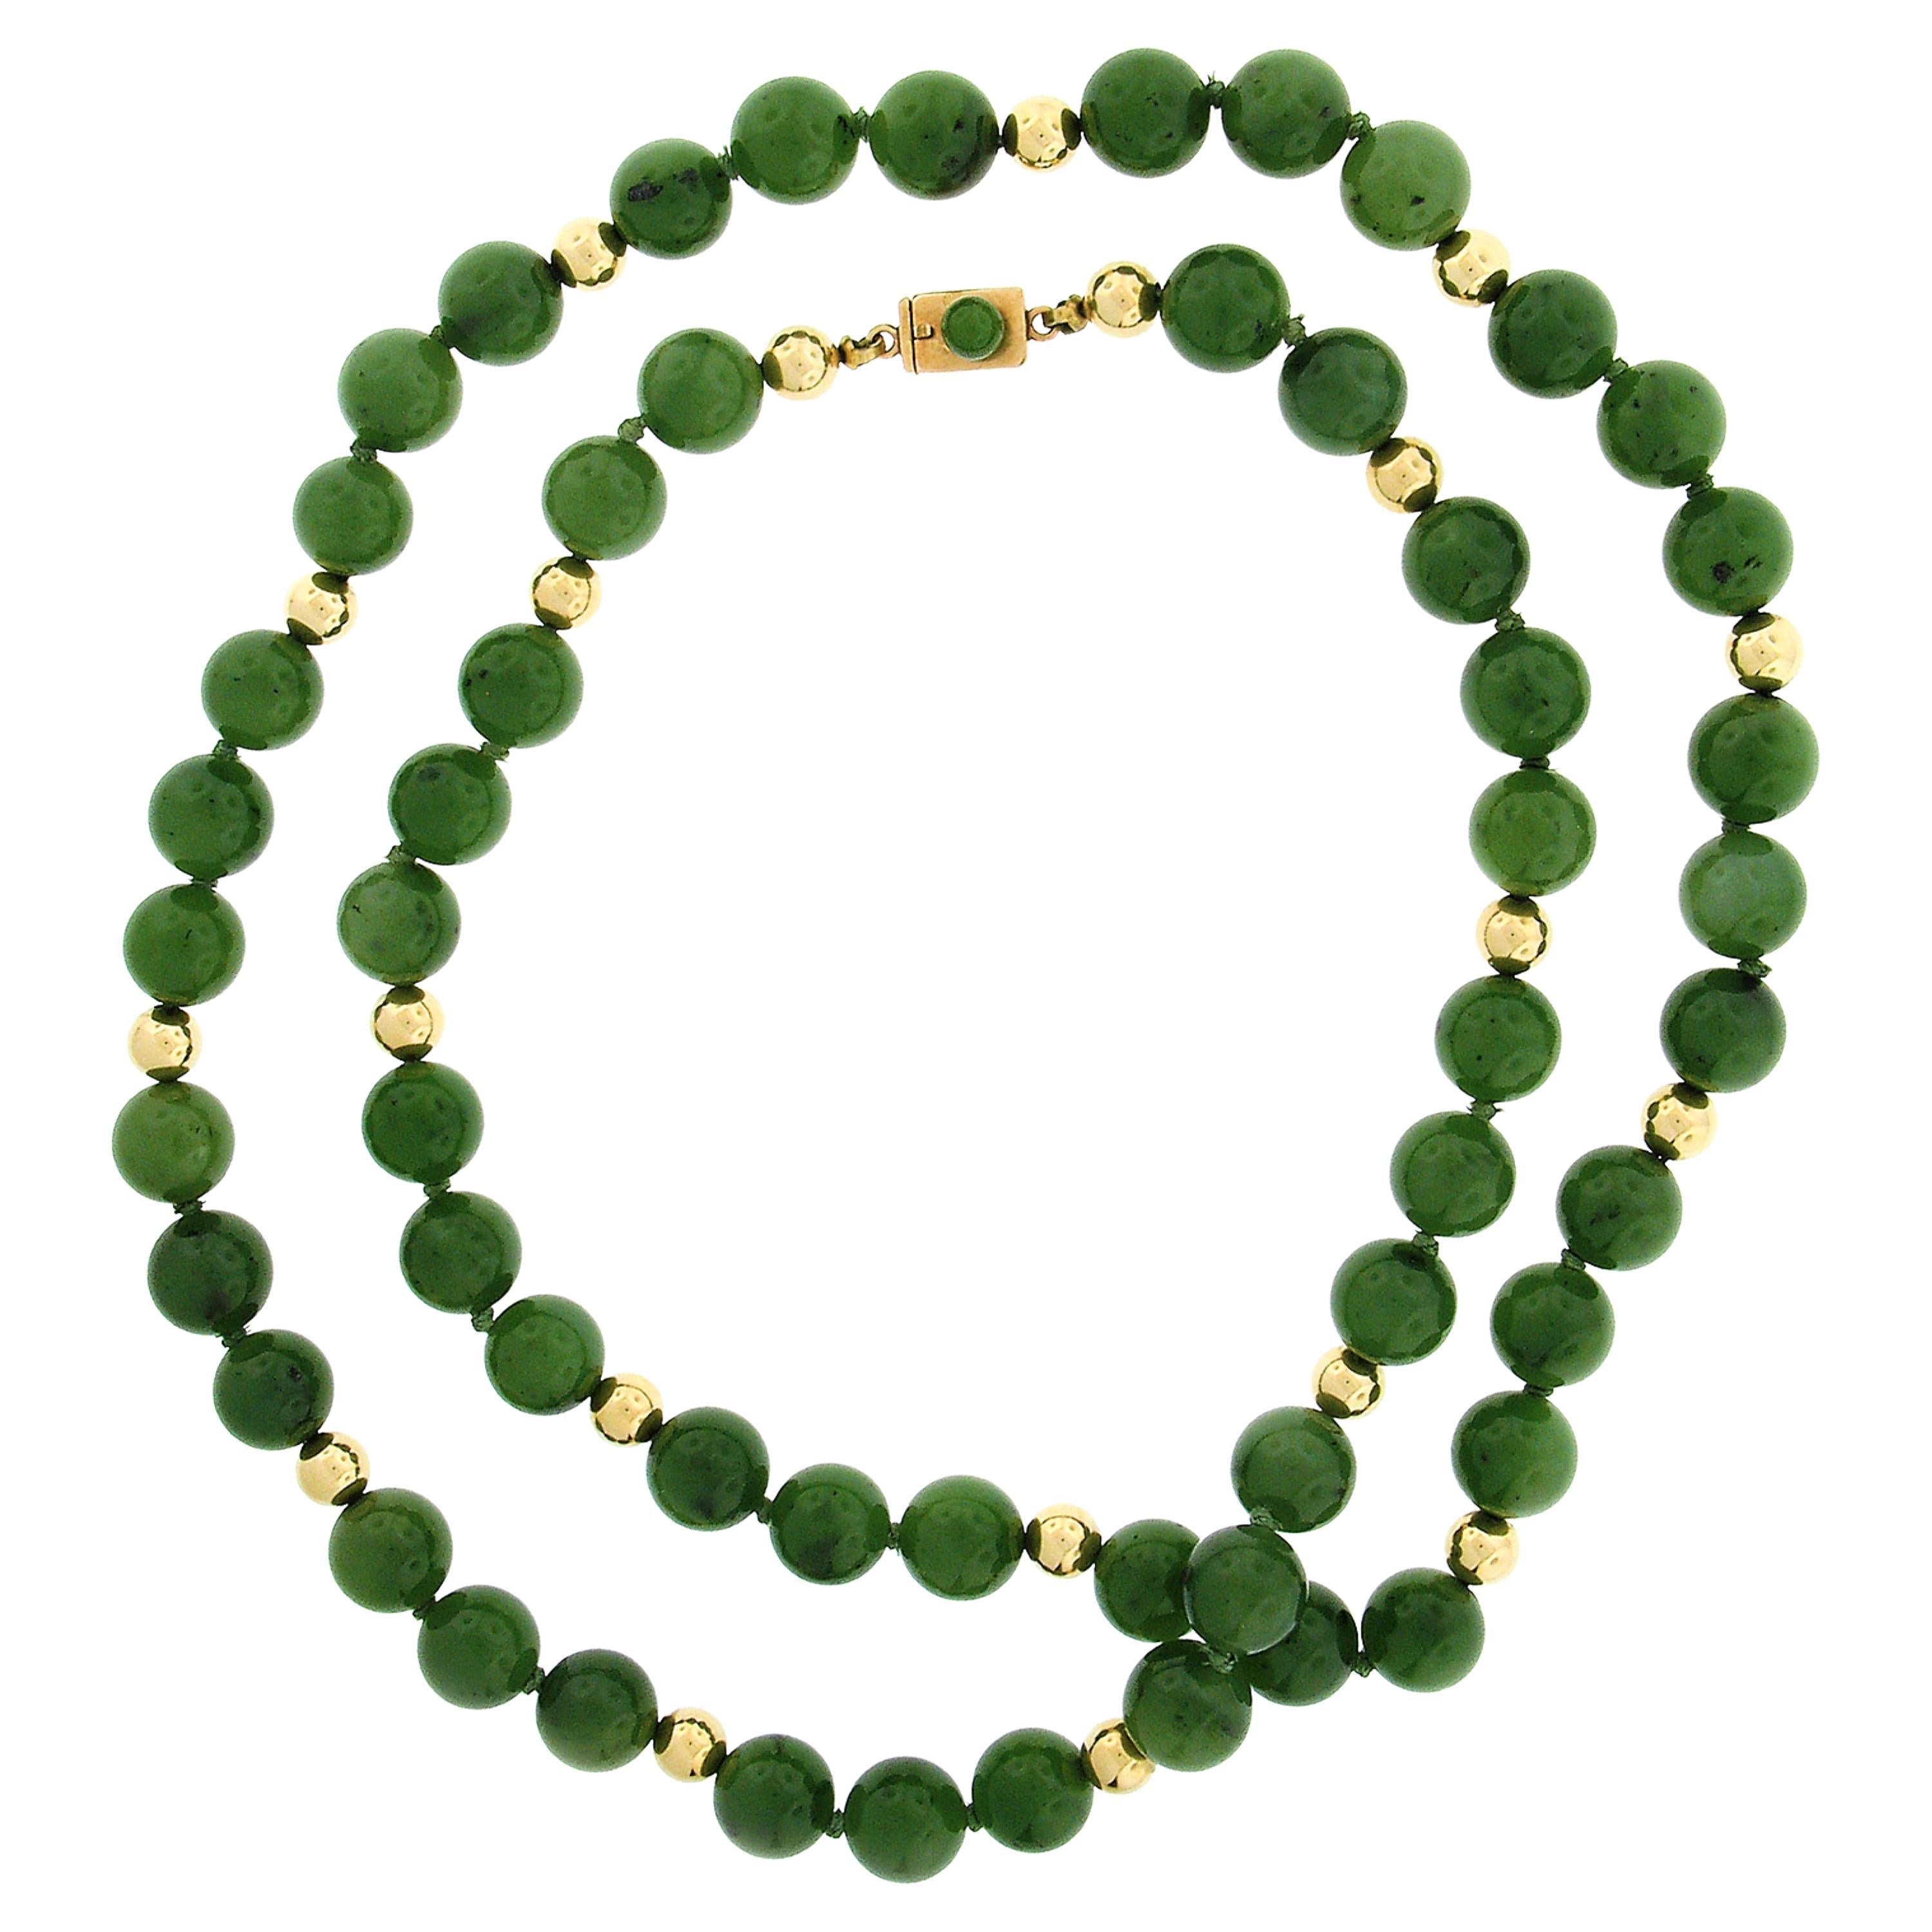 Vintage Round Nephrite Jade Bead Strand Necklace W/ 14k Gold Balls & Clasp For Sale